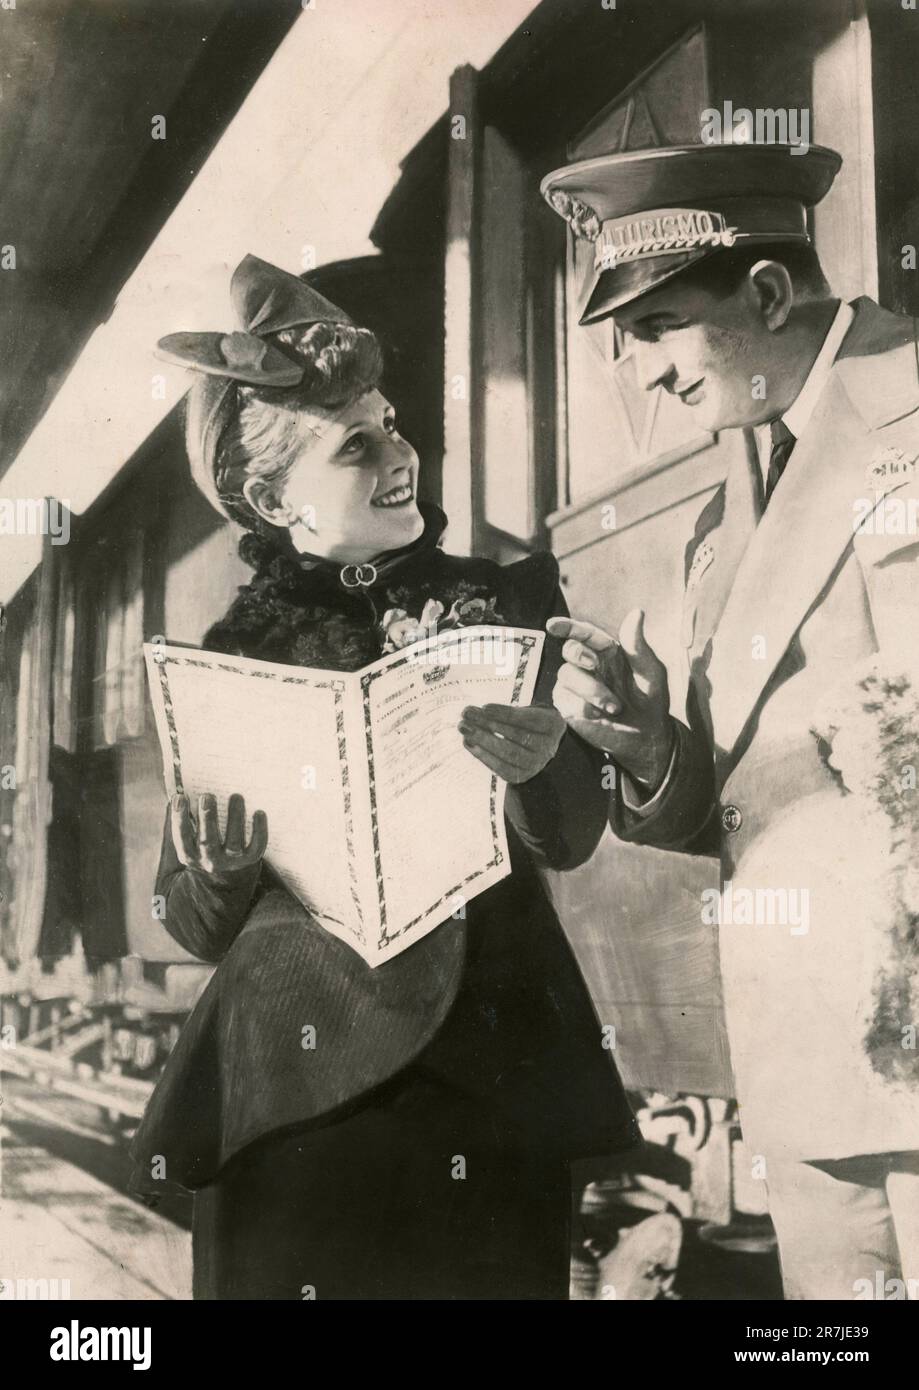 Railway advertisement of a woman asking information to the conductor, Italy 1930s Stock Photo